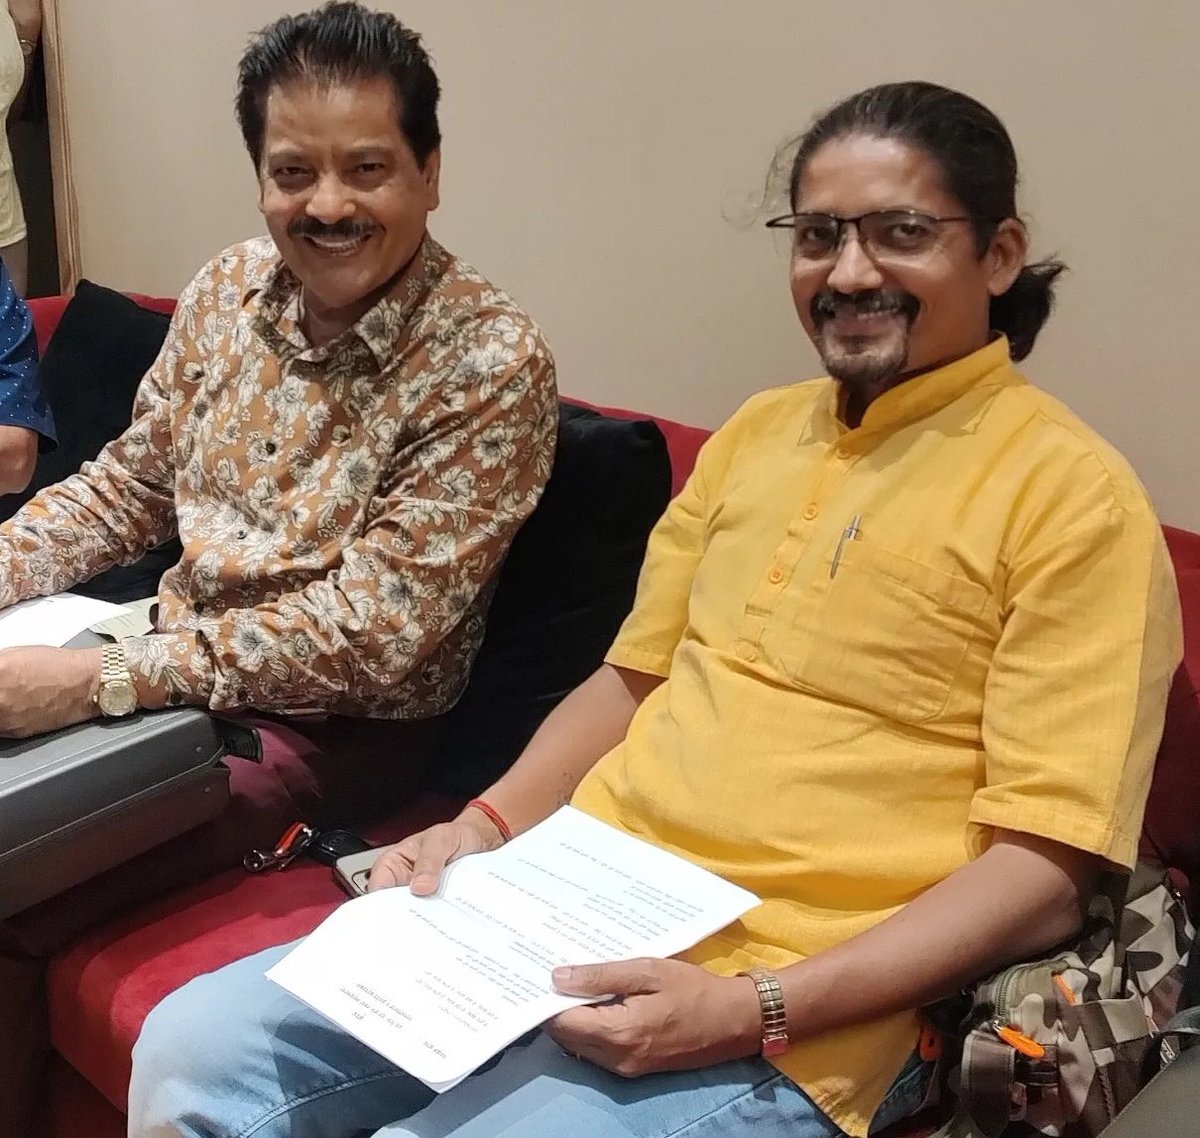 Recording moment with The Legend Bollywood Singer Shri Udit Narayan ji 
#SONG #Bollywood #Bollywoodnews #bollywoodcelebrity